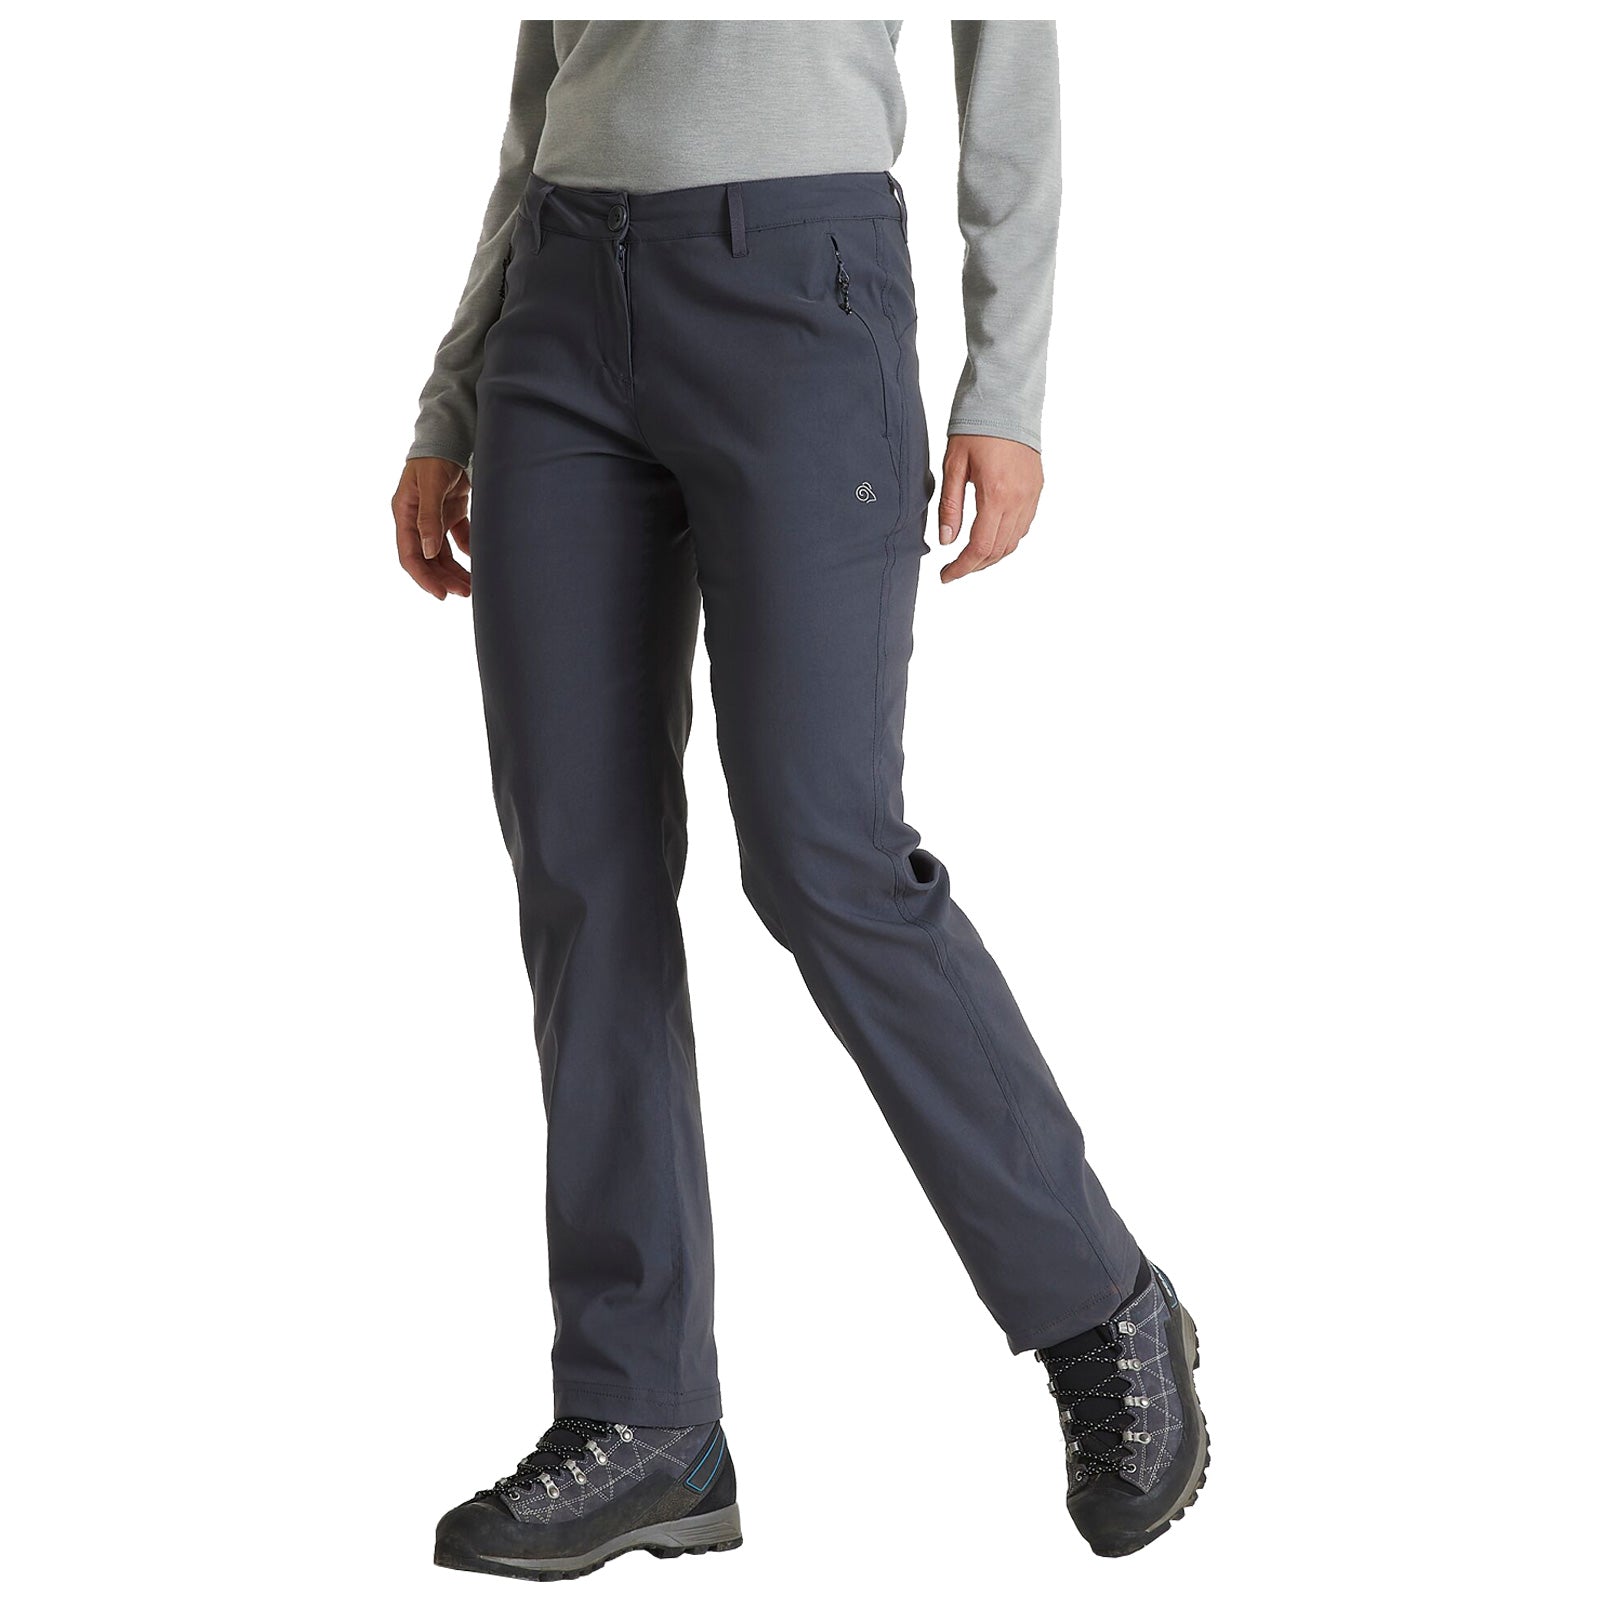 Does not apply Lady Sherpa Harem Pants Fleece Lined Trousers India | Ubuy